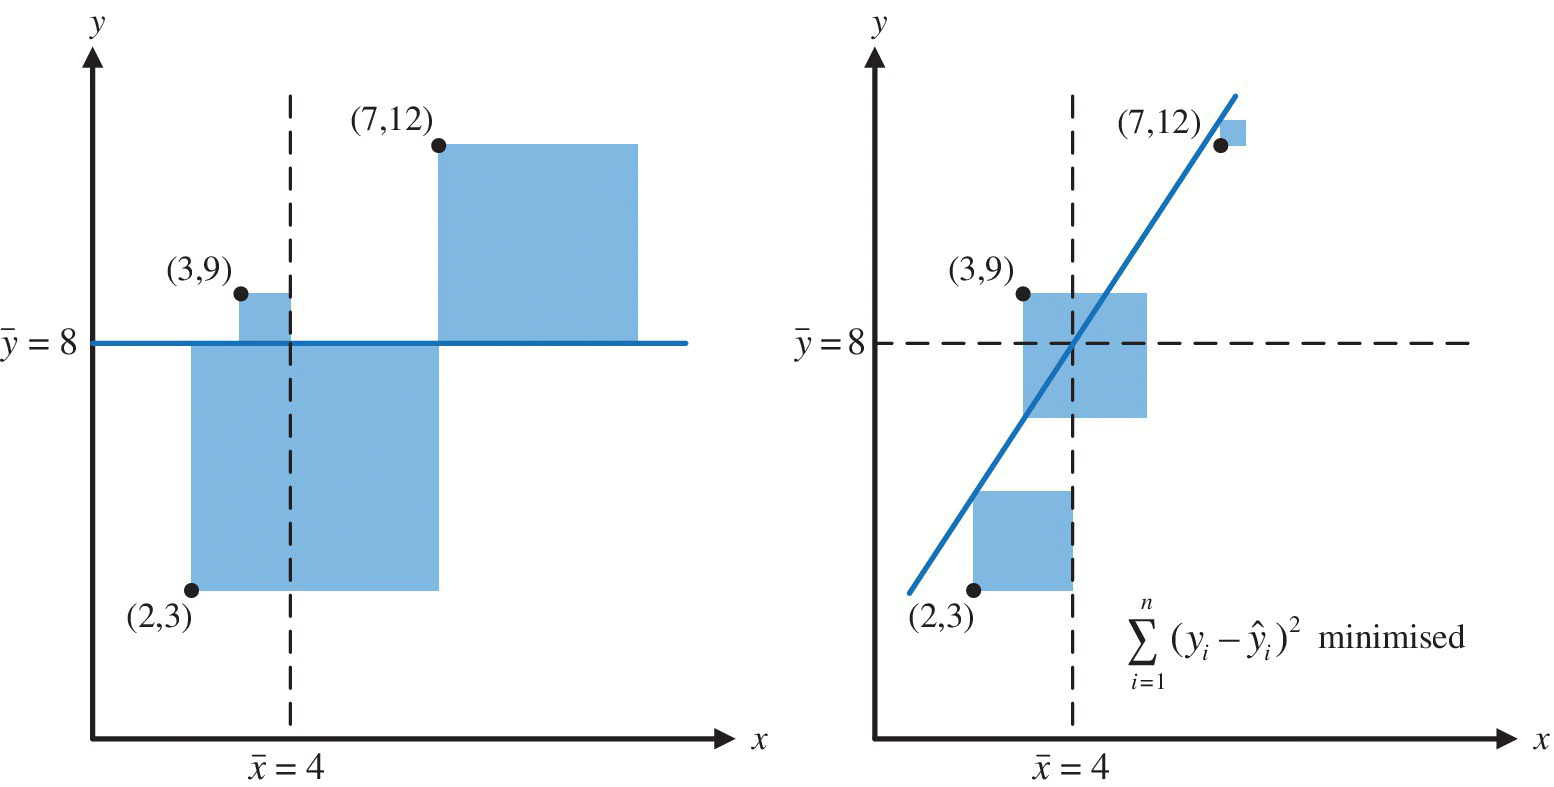 Minimisation of the total sum of the squares in y direction, displaying 2 xy-planes with a horizontal line (left) and diagonal line (right). Each line has coordinates (2,3), (3,9) and (7,12) with shaded squares.